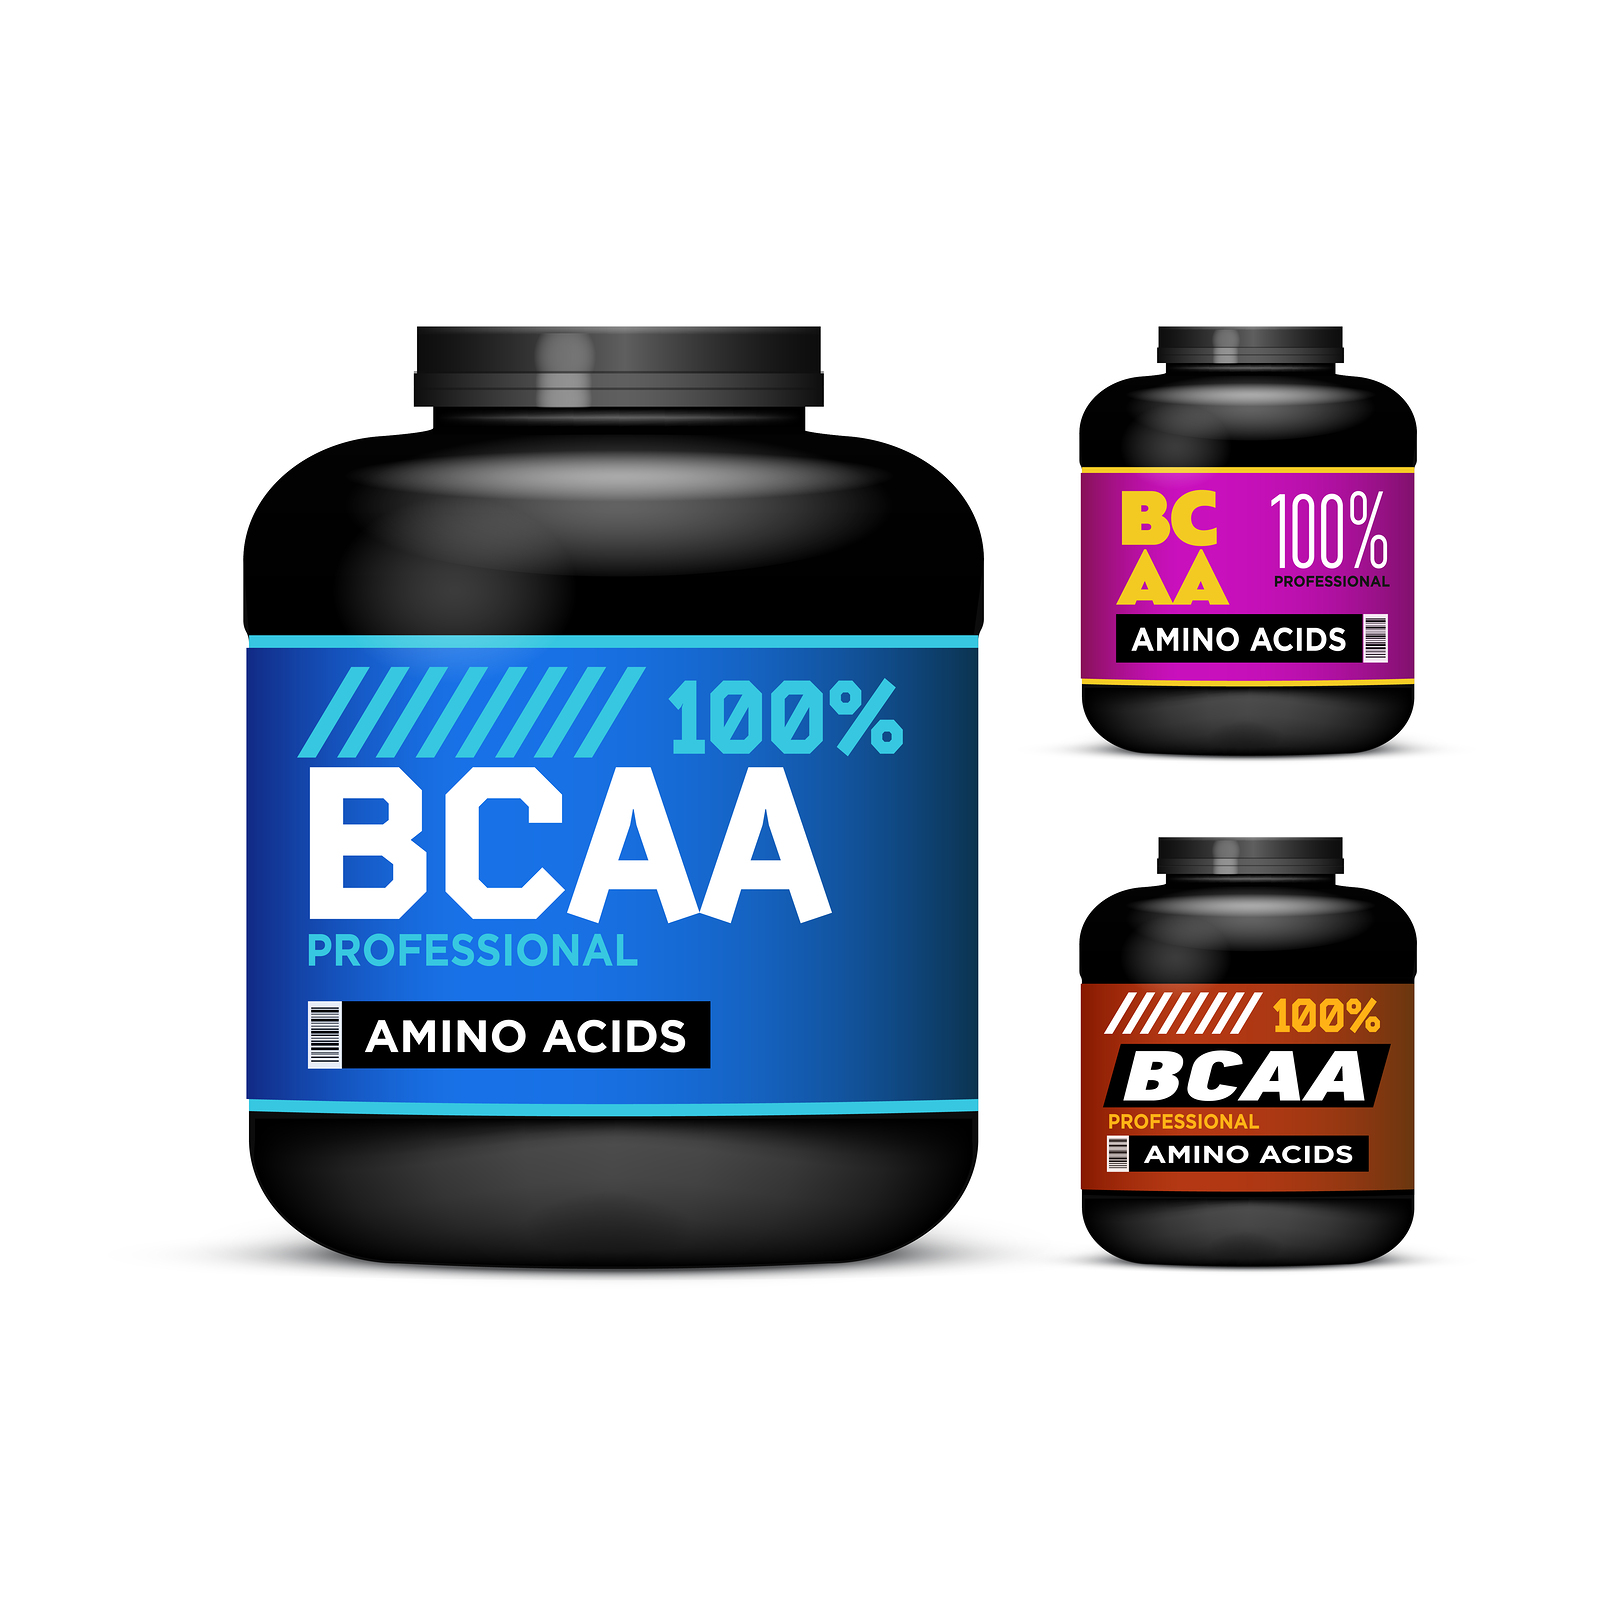 5 Key Times to Supplement with Branched-Chain Amino Acids